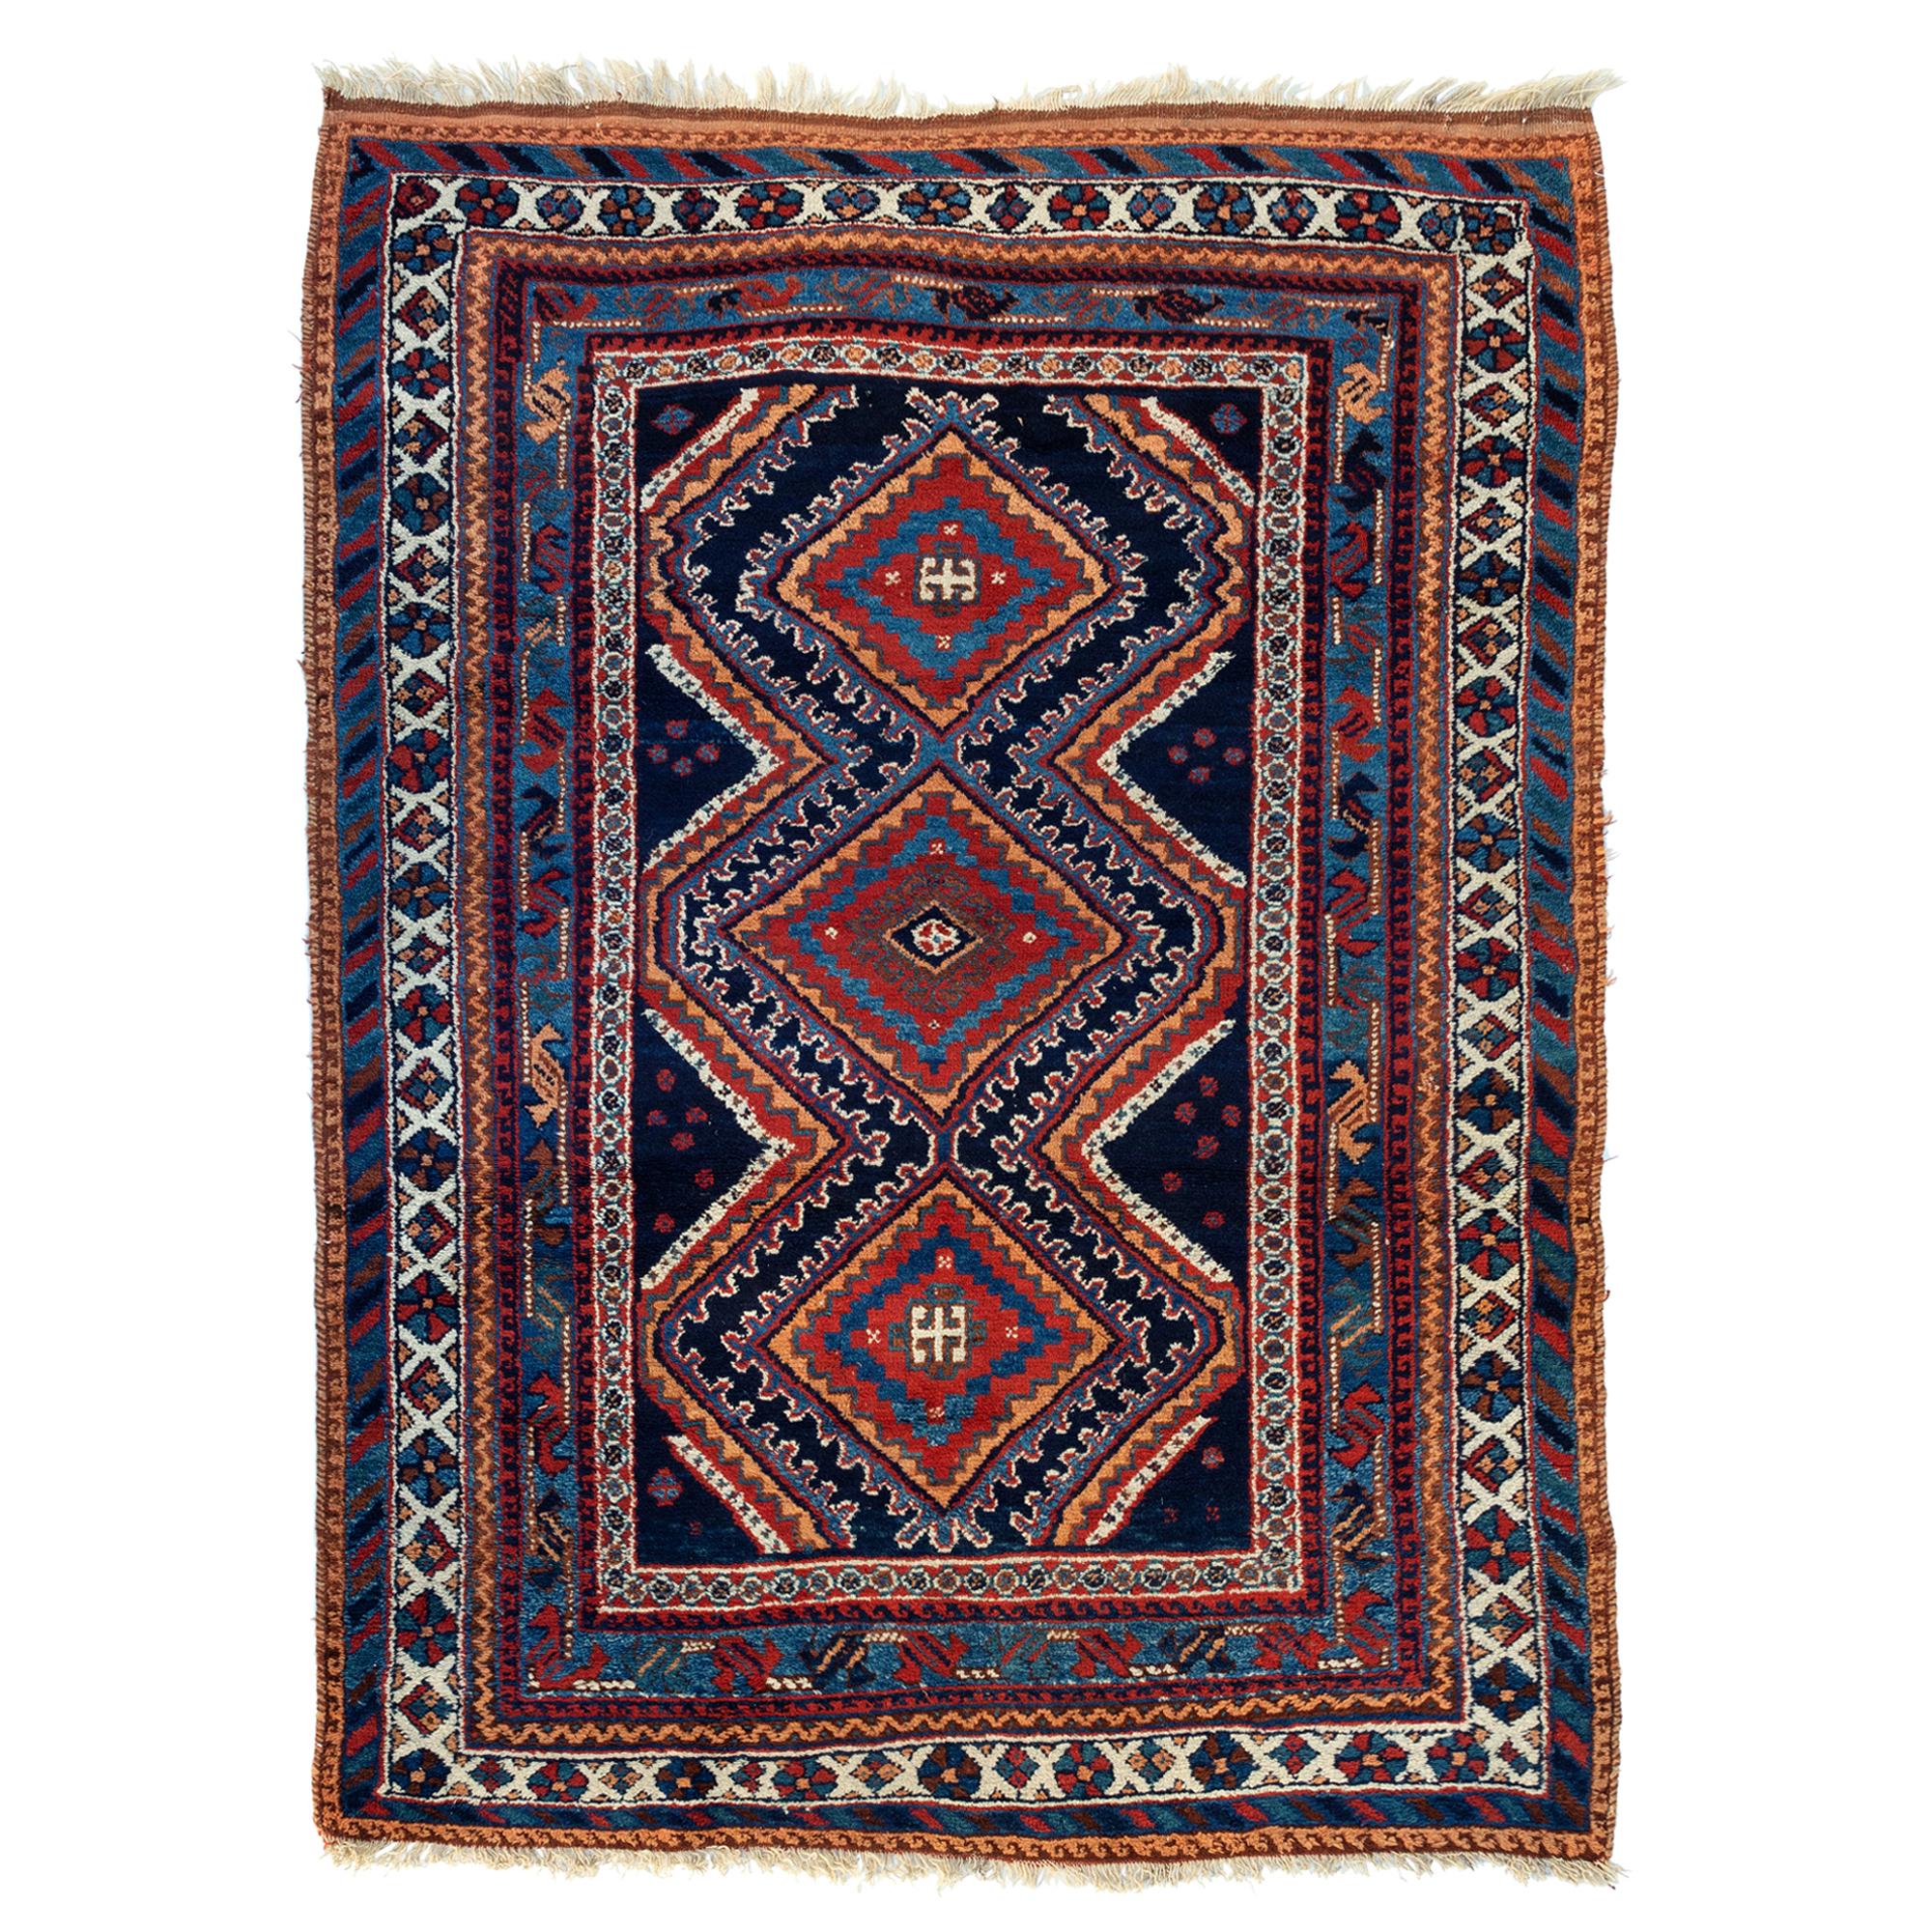 Vintage Red and Navy Blue Tribal Geometric Persian Afshar Rug, circa 1920s